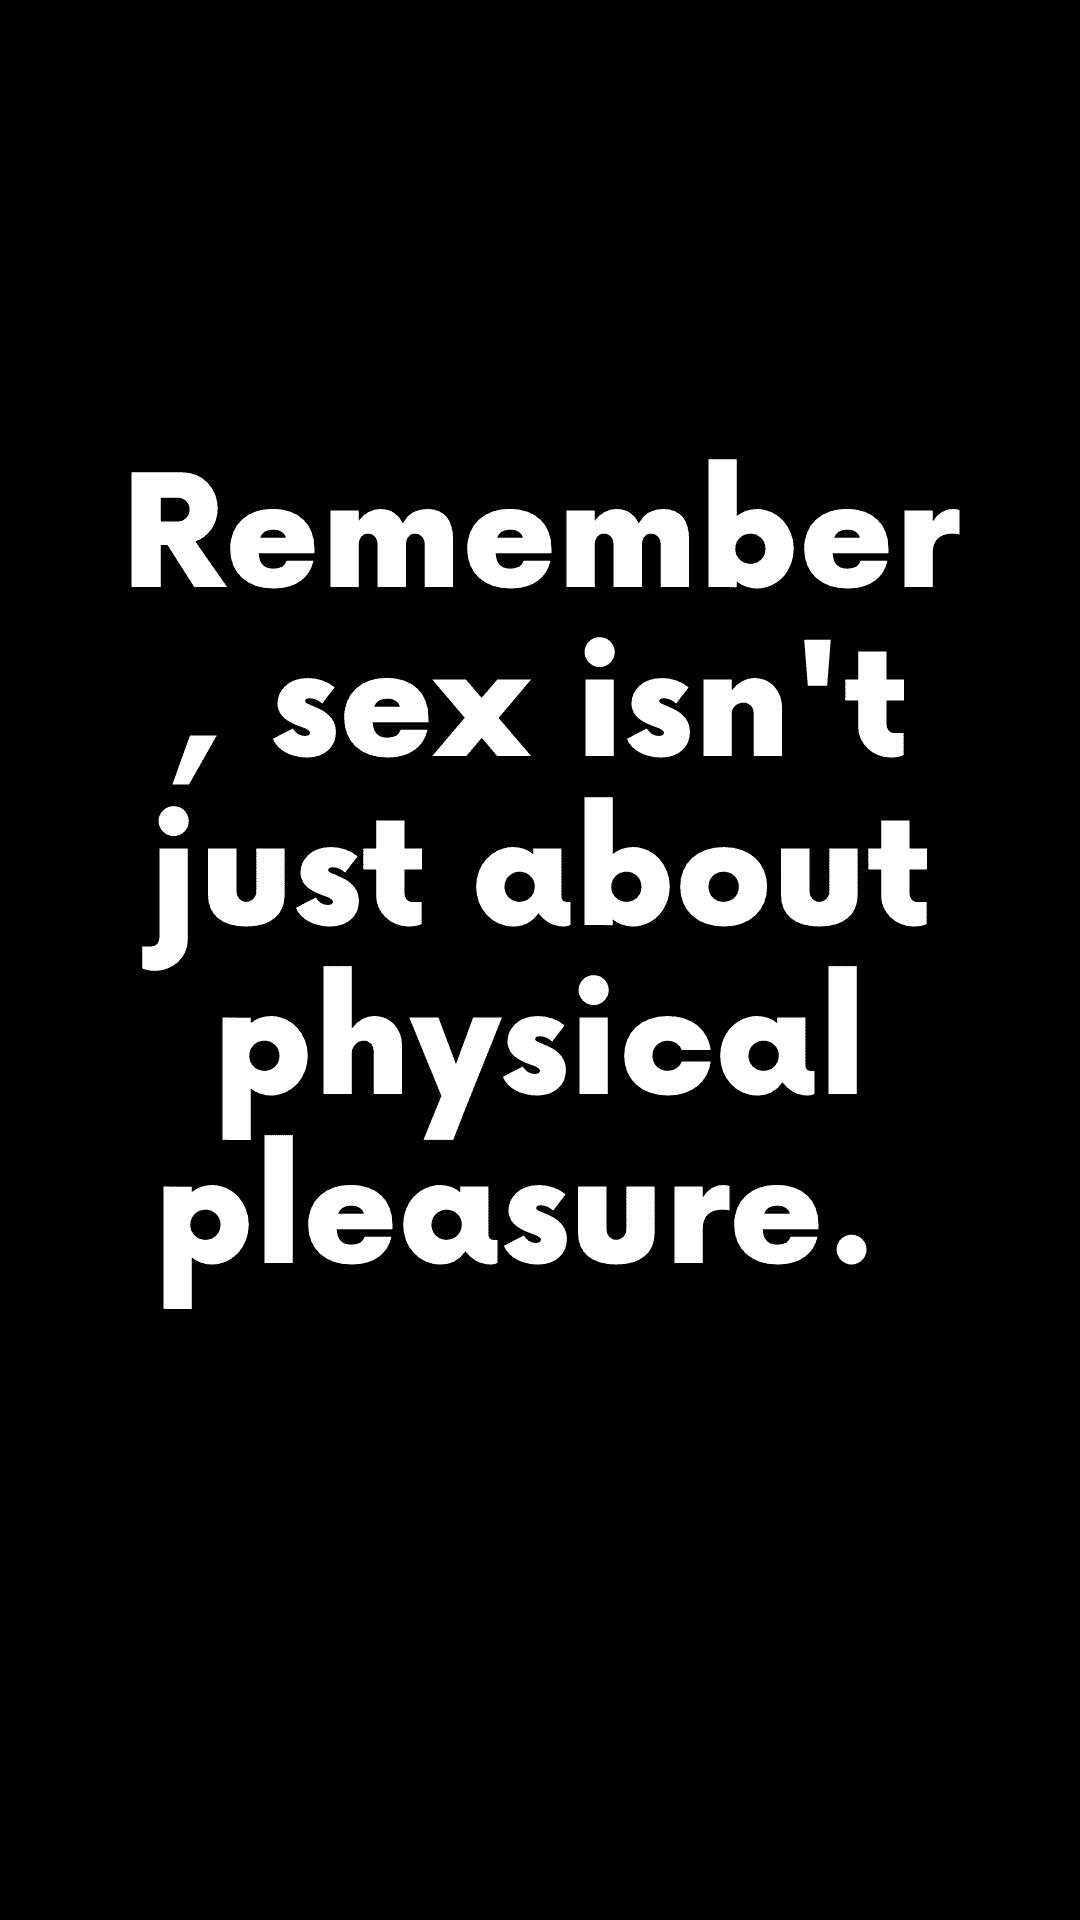 Remember, sex isn’t just about physical pleasure. (Quote)